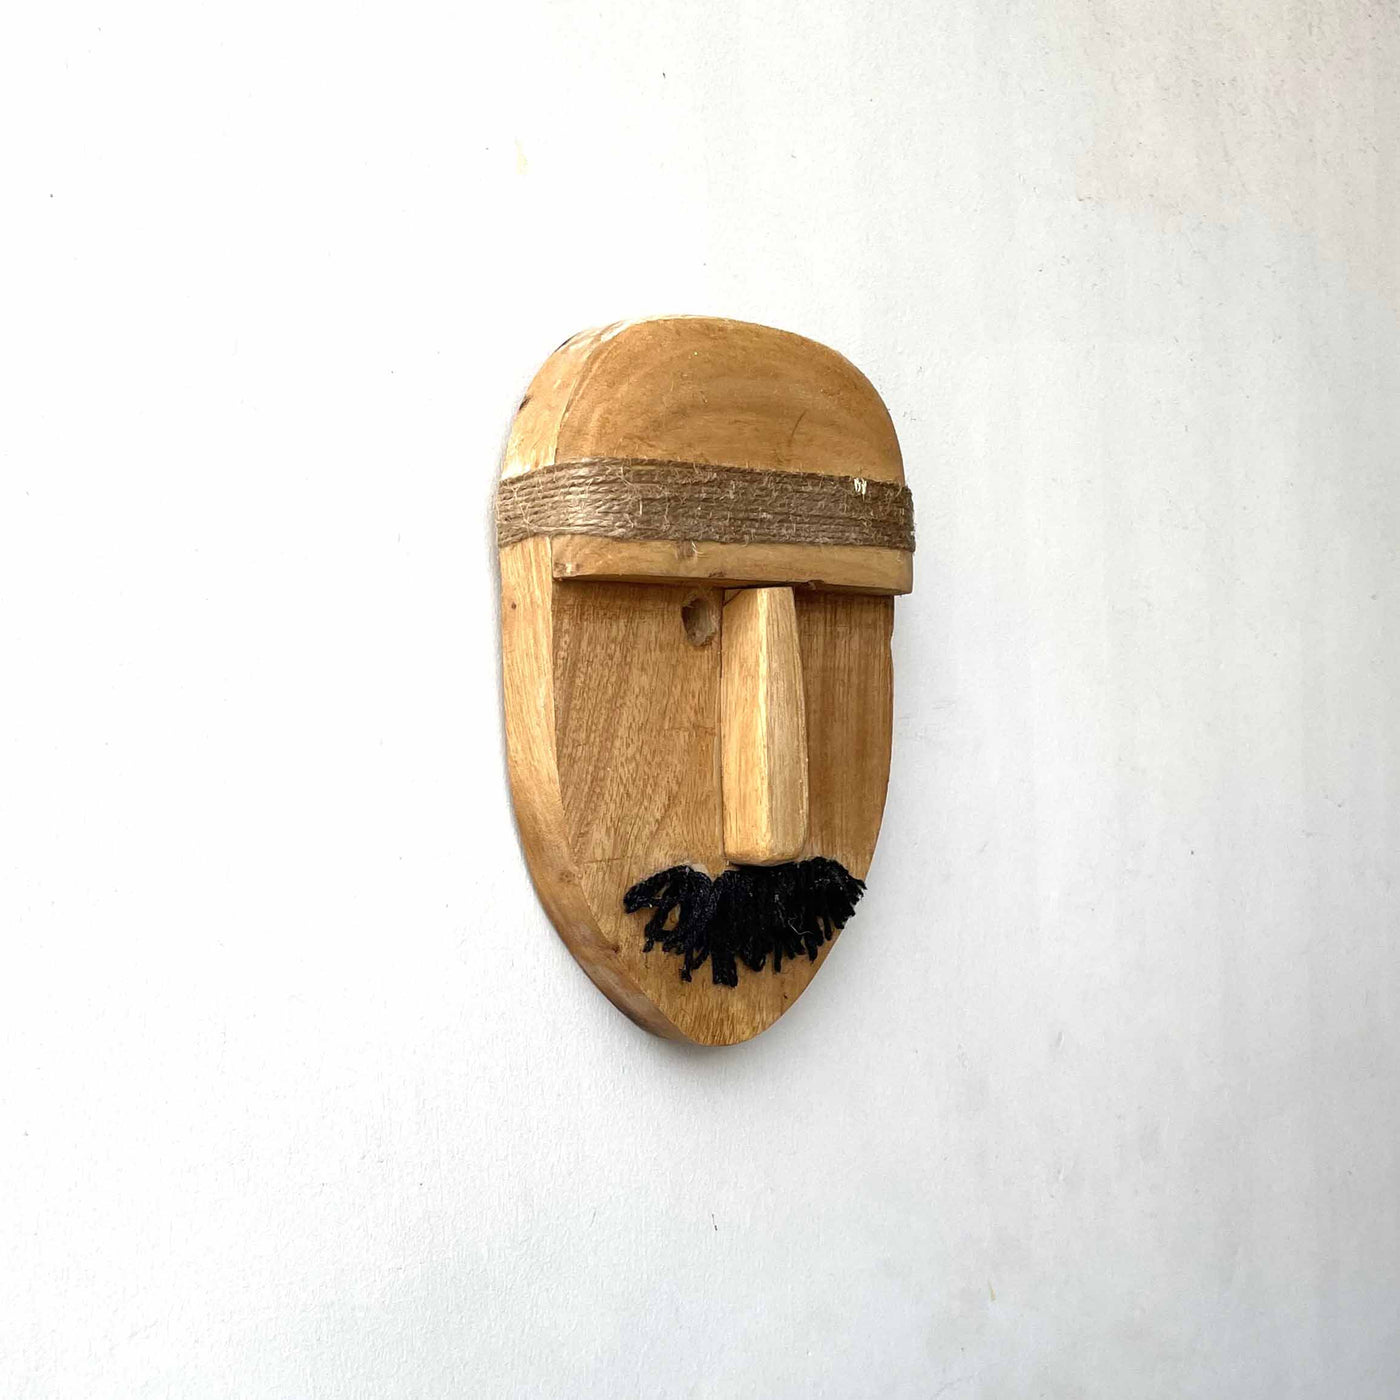 Wooden Tribal Man with Mustache Small Mask - Wall Decor - 2